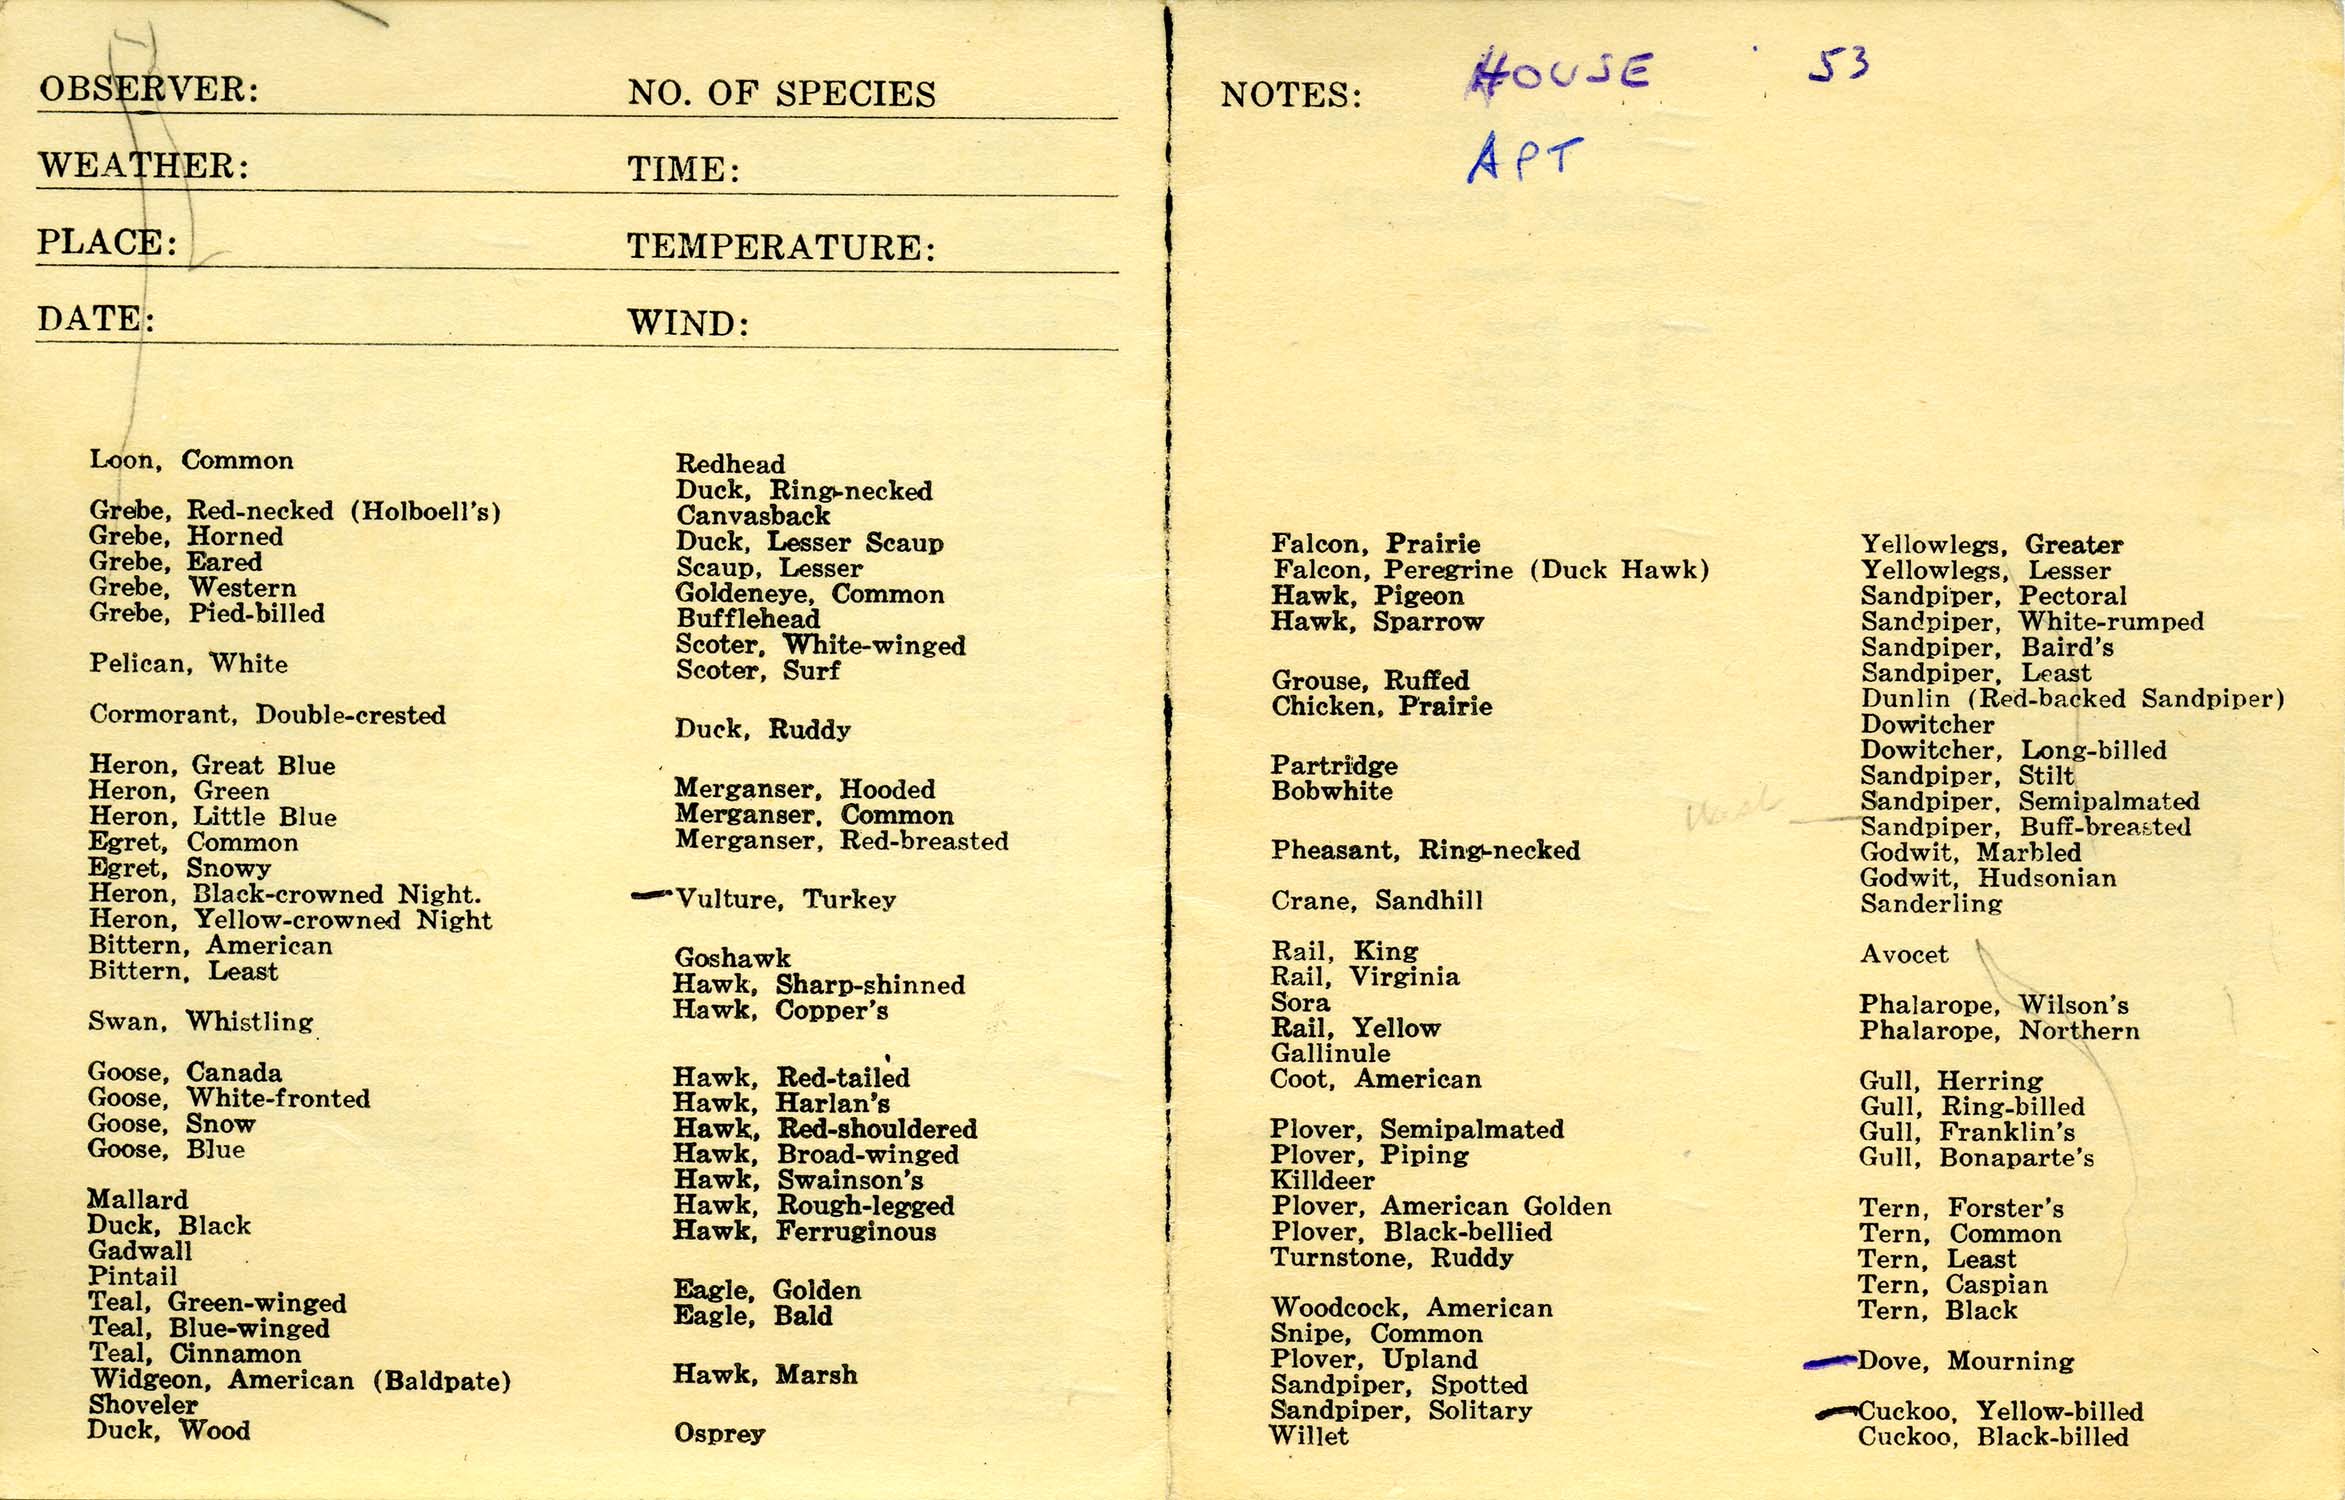 Bird checklist compiled by Woodward H. Brown covering 1976-1977